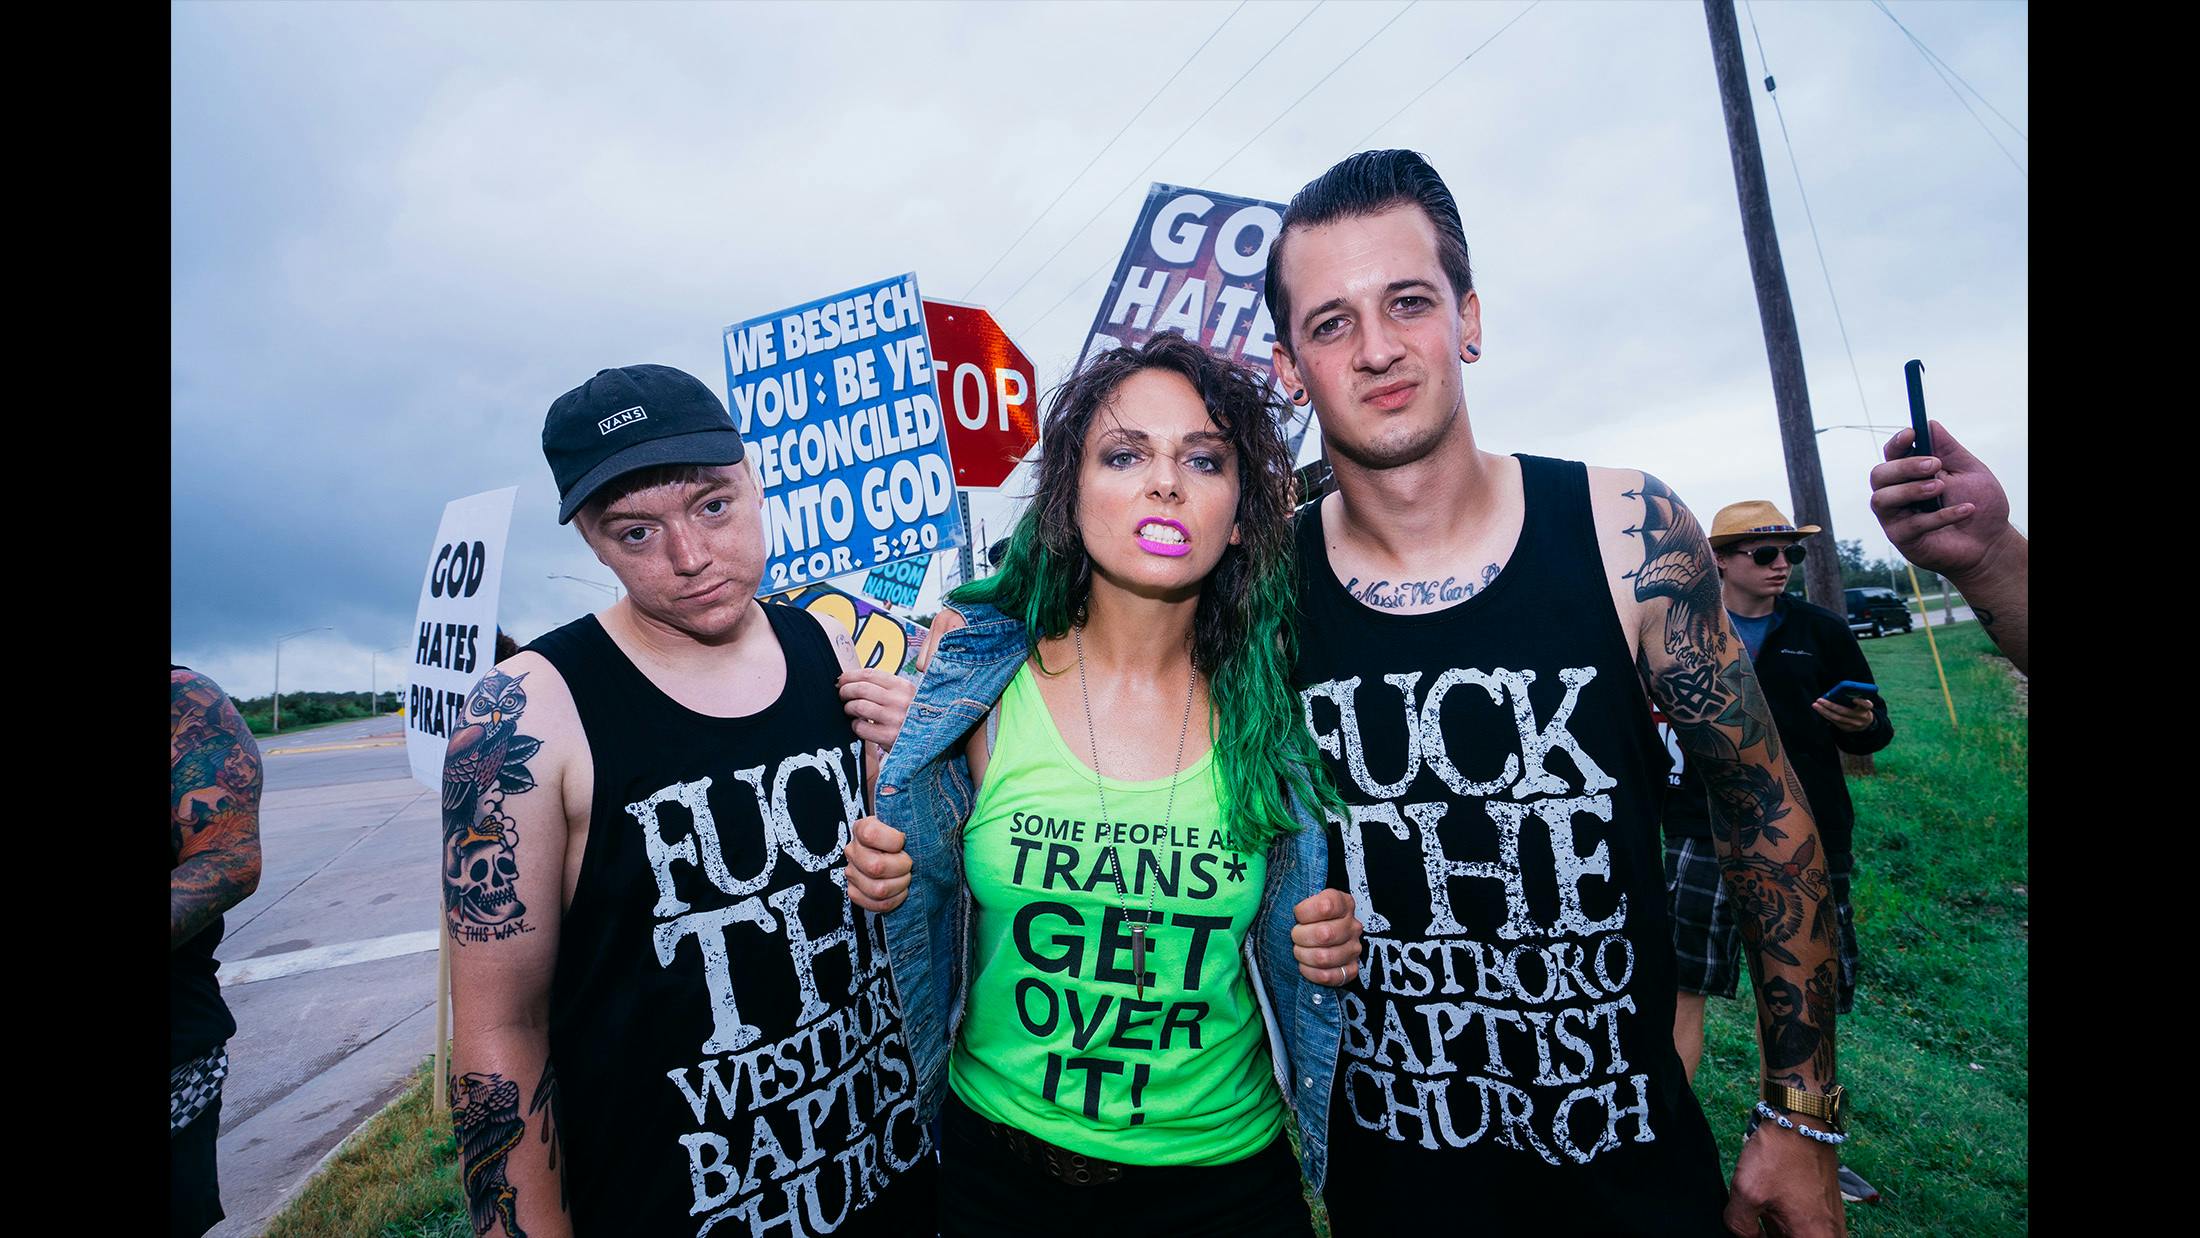 Ian and Sean, along with Shawna from WOW, giving the Westboro Baptist Church a piece of their minds and letting them know they weren’t welcome.